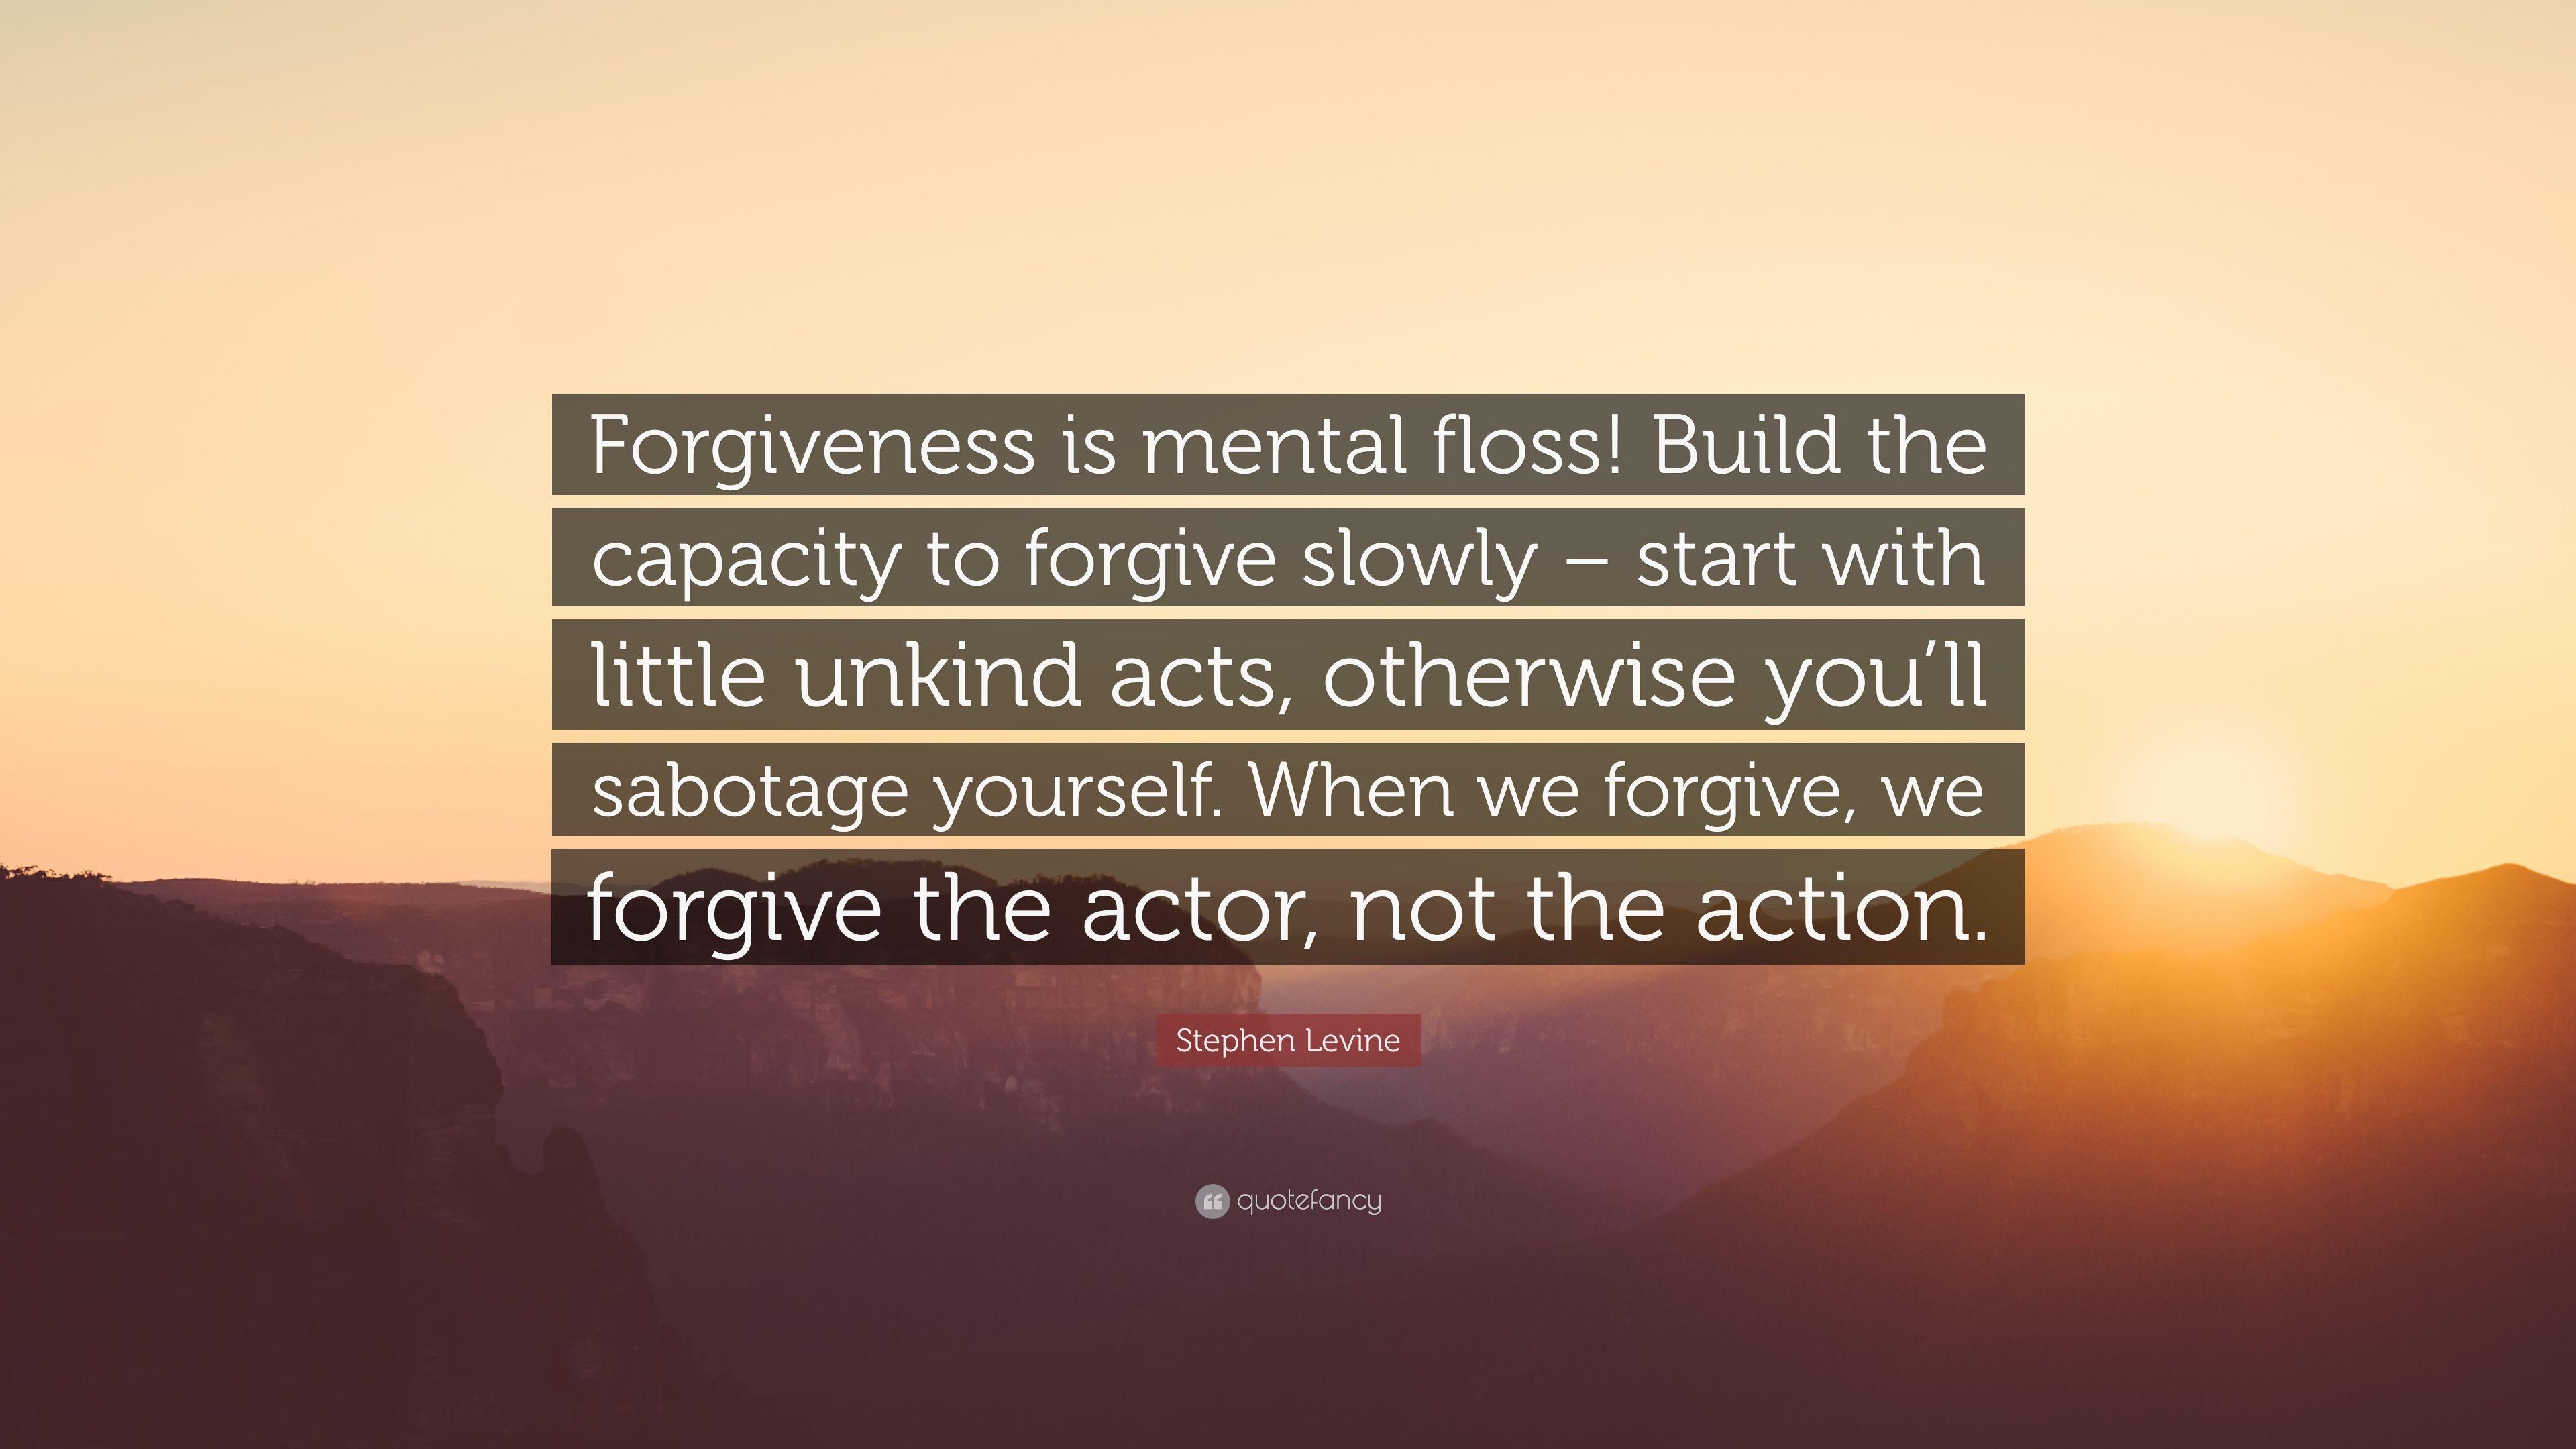 Stephen Levine Quote: “Forgiveness is mental floss! Build